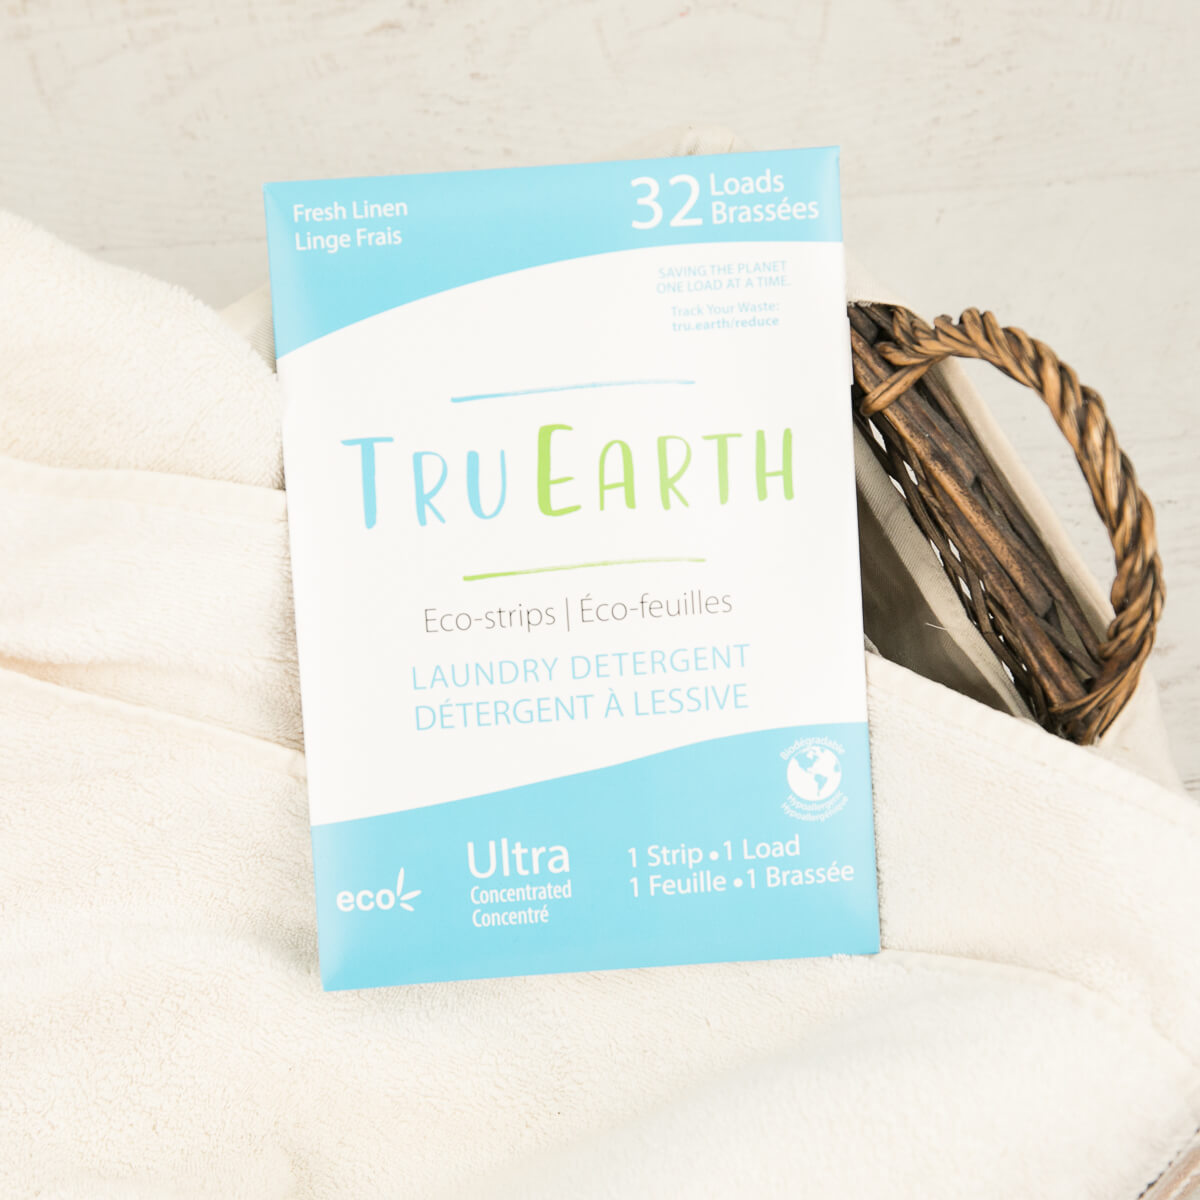 Tru Earth Eco-Strips Laundry Detergent